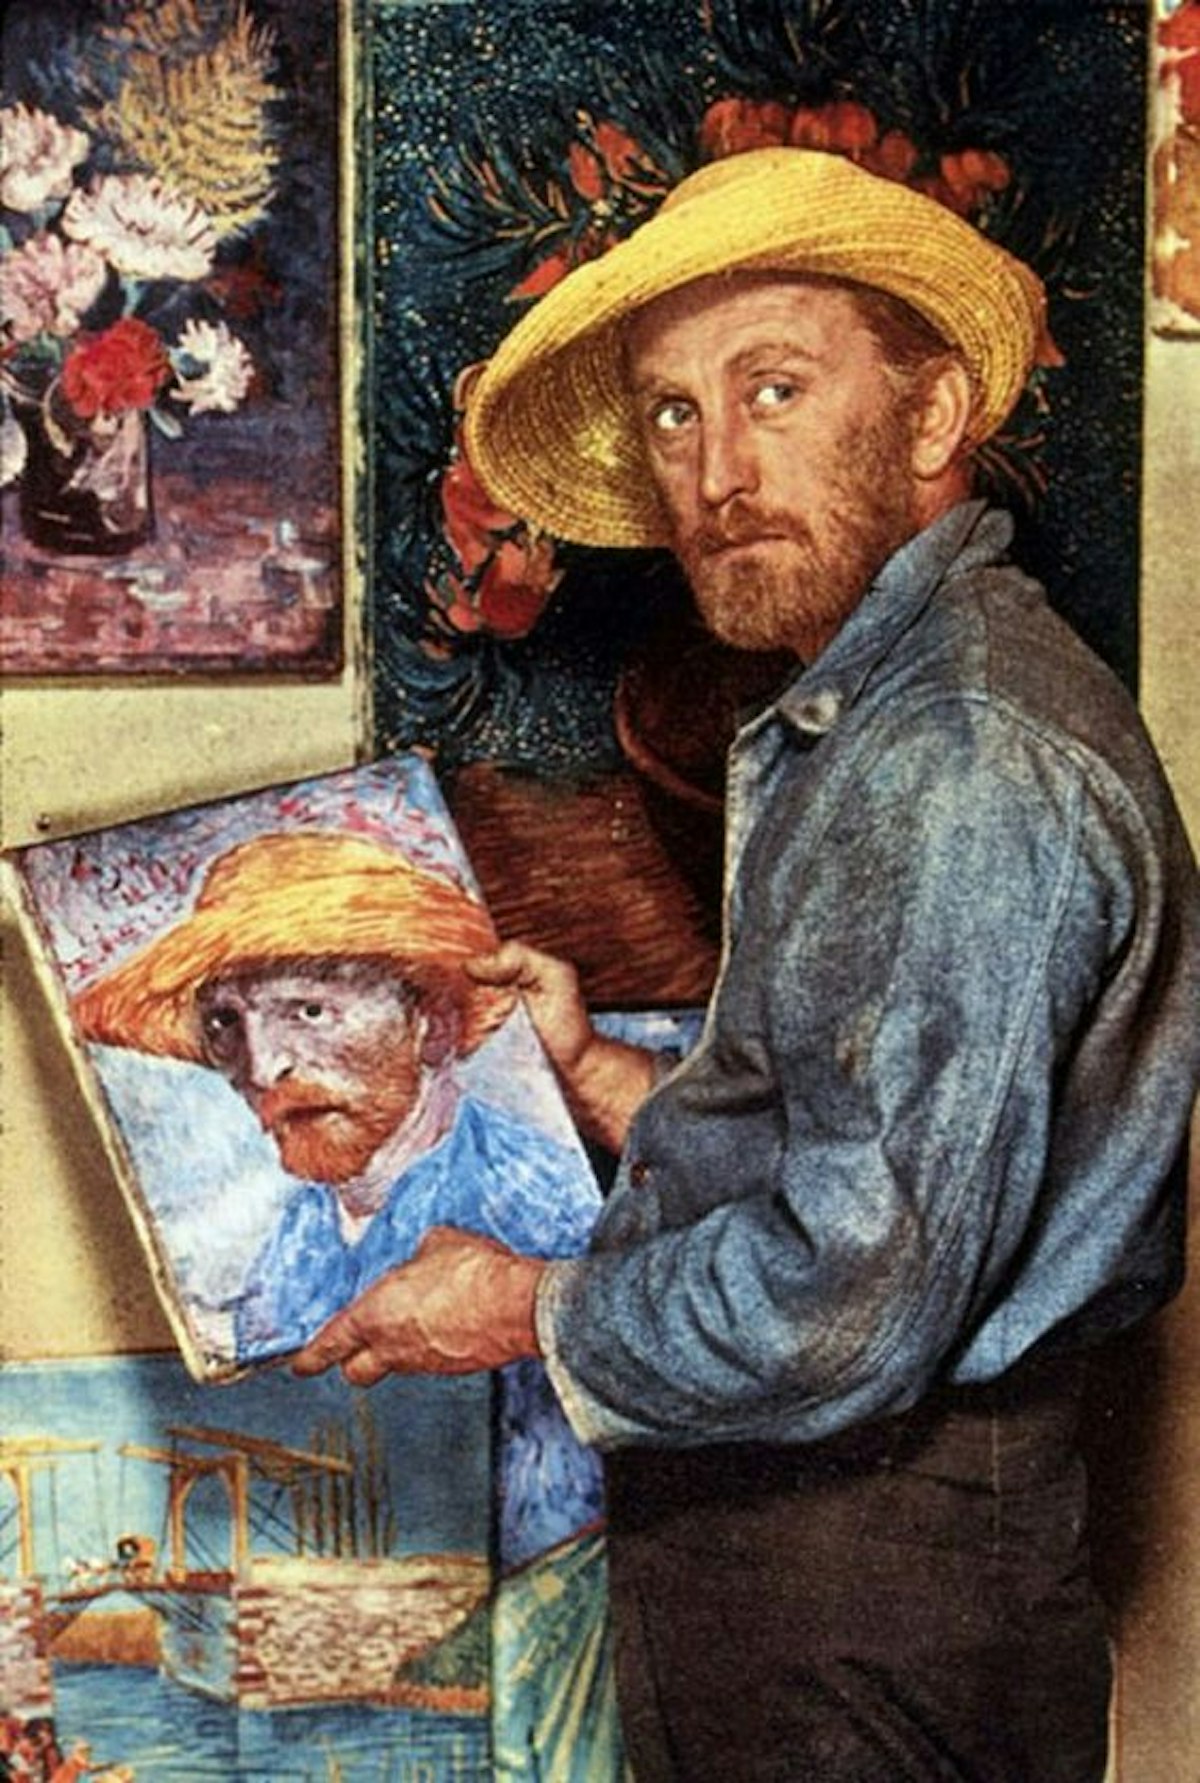 featured image - Brushstrokes of Turmoil: Vincent van Gogh's Artistic Brilliance and Mental Struggles